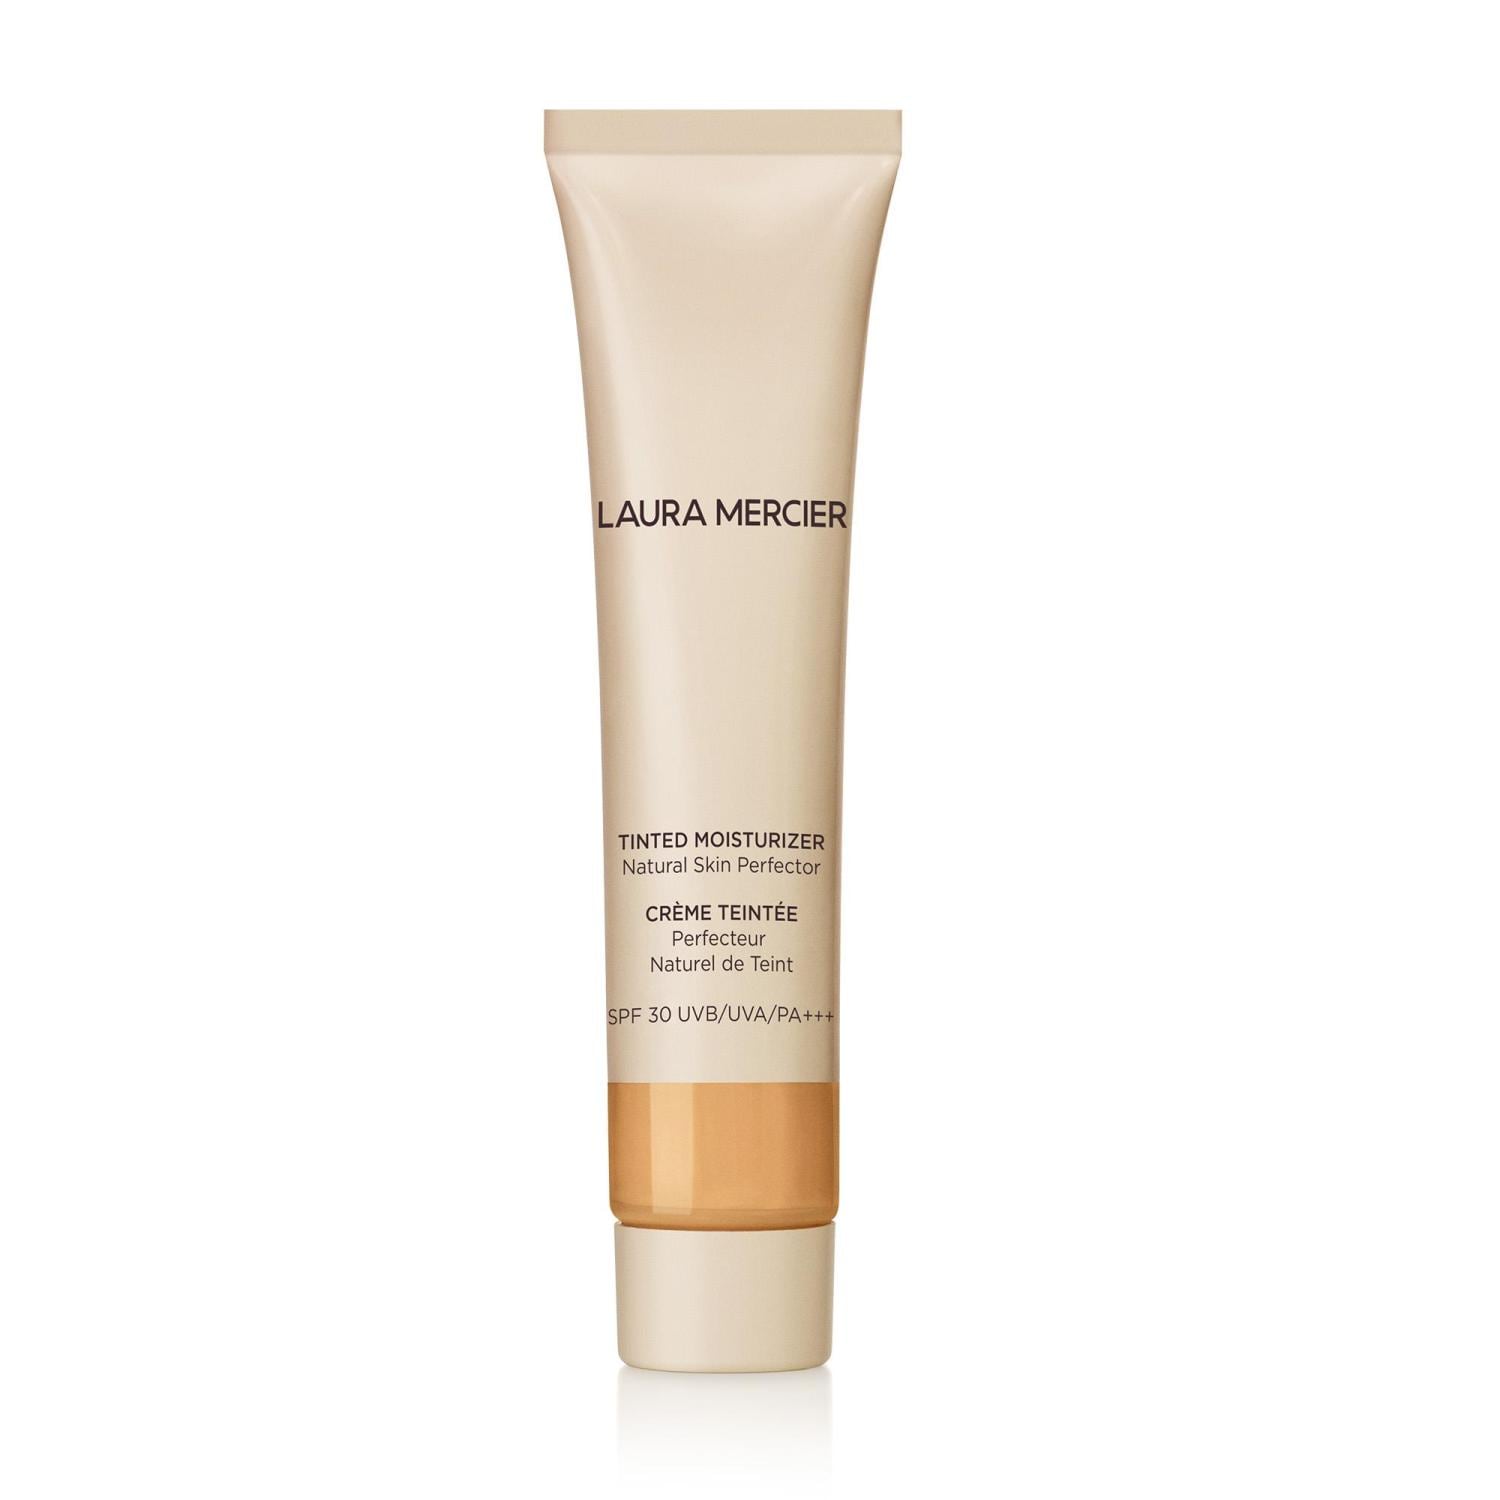 Laura Mercier Beauty To Go Travel Size - Tinted Moisturizer Natural Skin Perfector SPF 30, Nr. 4N1 - WHEAT